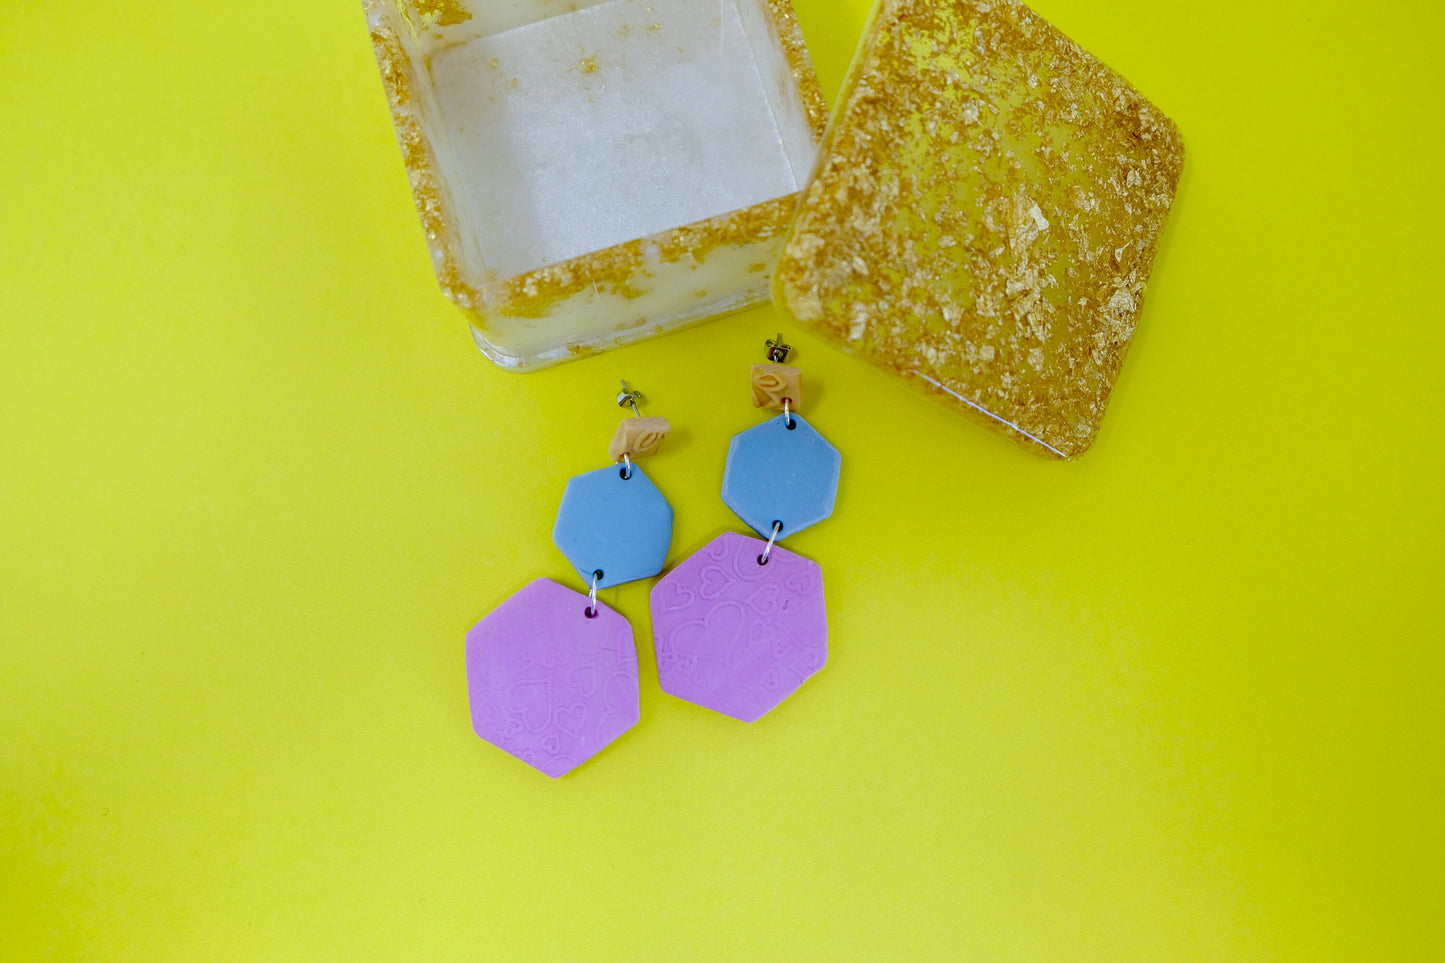 Imperfectly Perfect Seconds - Handmade Polymer Clay Earrings - Assorted Colourful Geometric Earrings